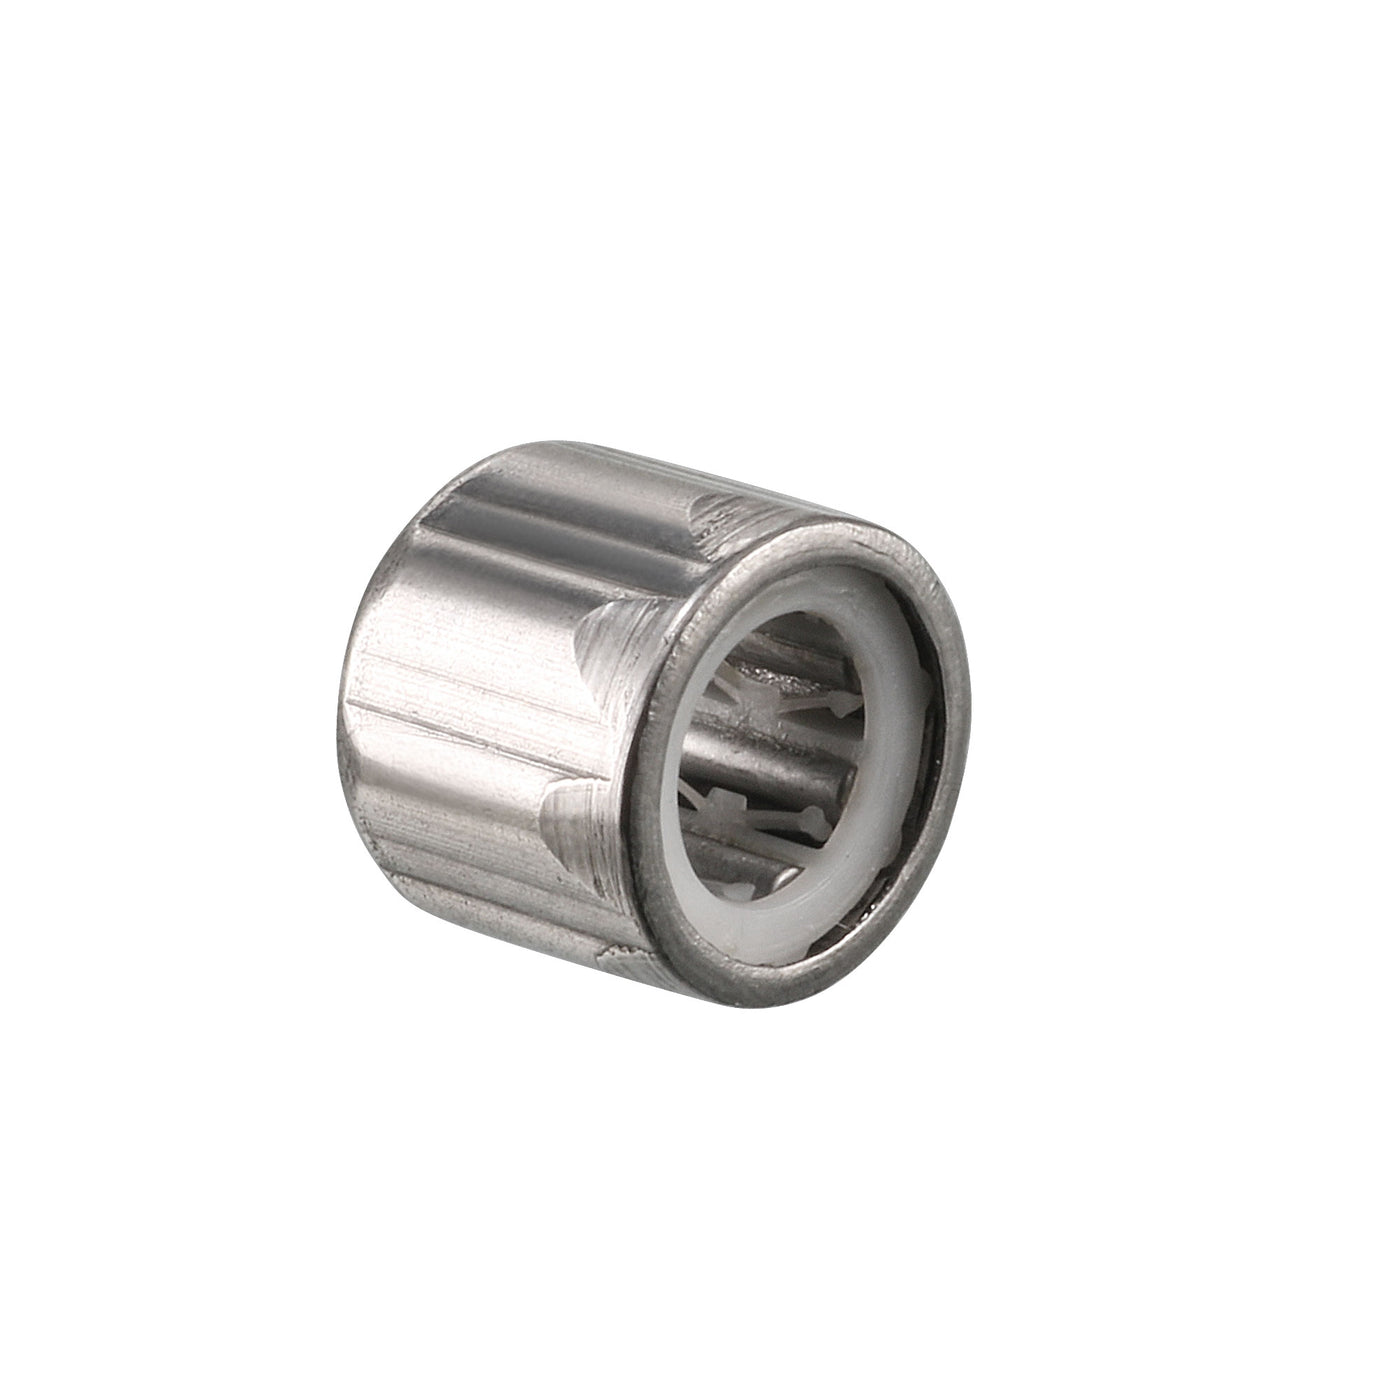 uxcell Uxcell 2 Pcs Needle Roller Bearings, 8mm Bore 14mm OD 12mm Width Chrome Steel Needles, One Way Clutch Bearing